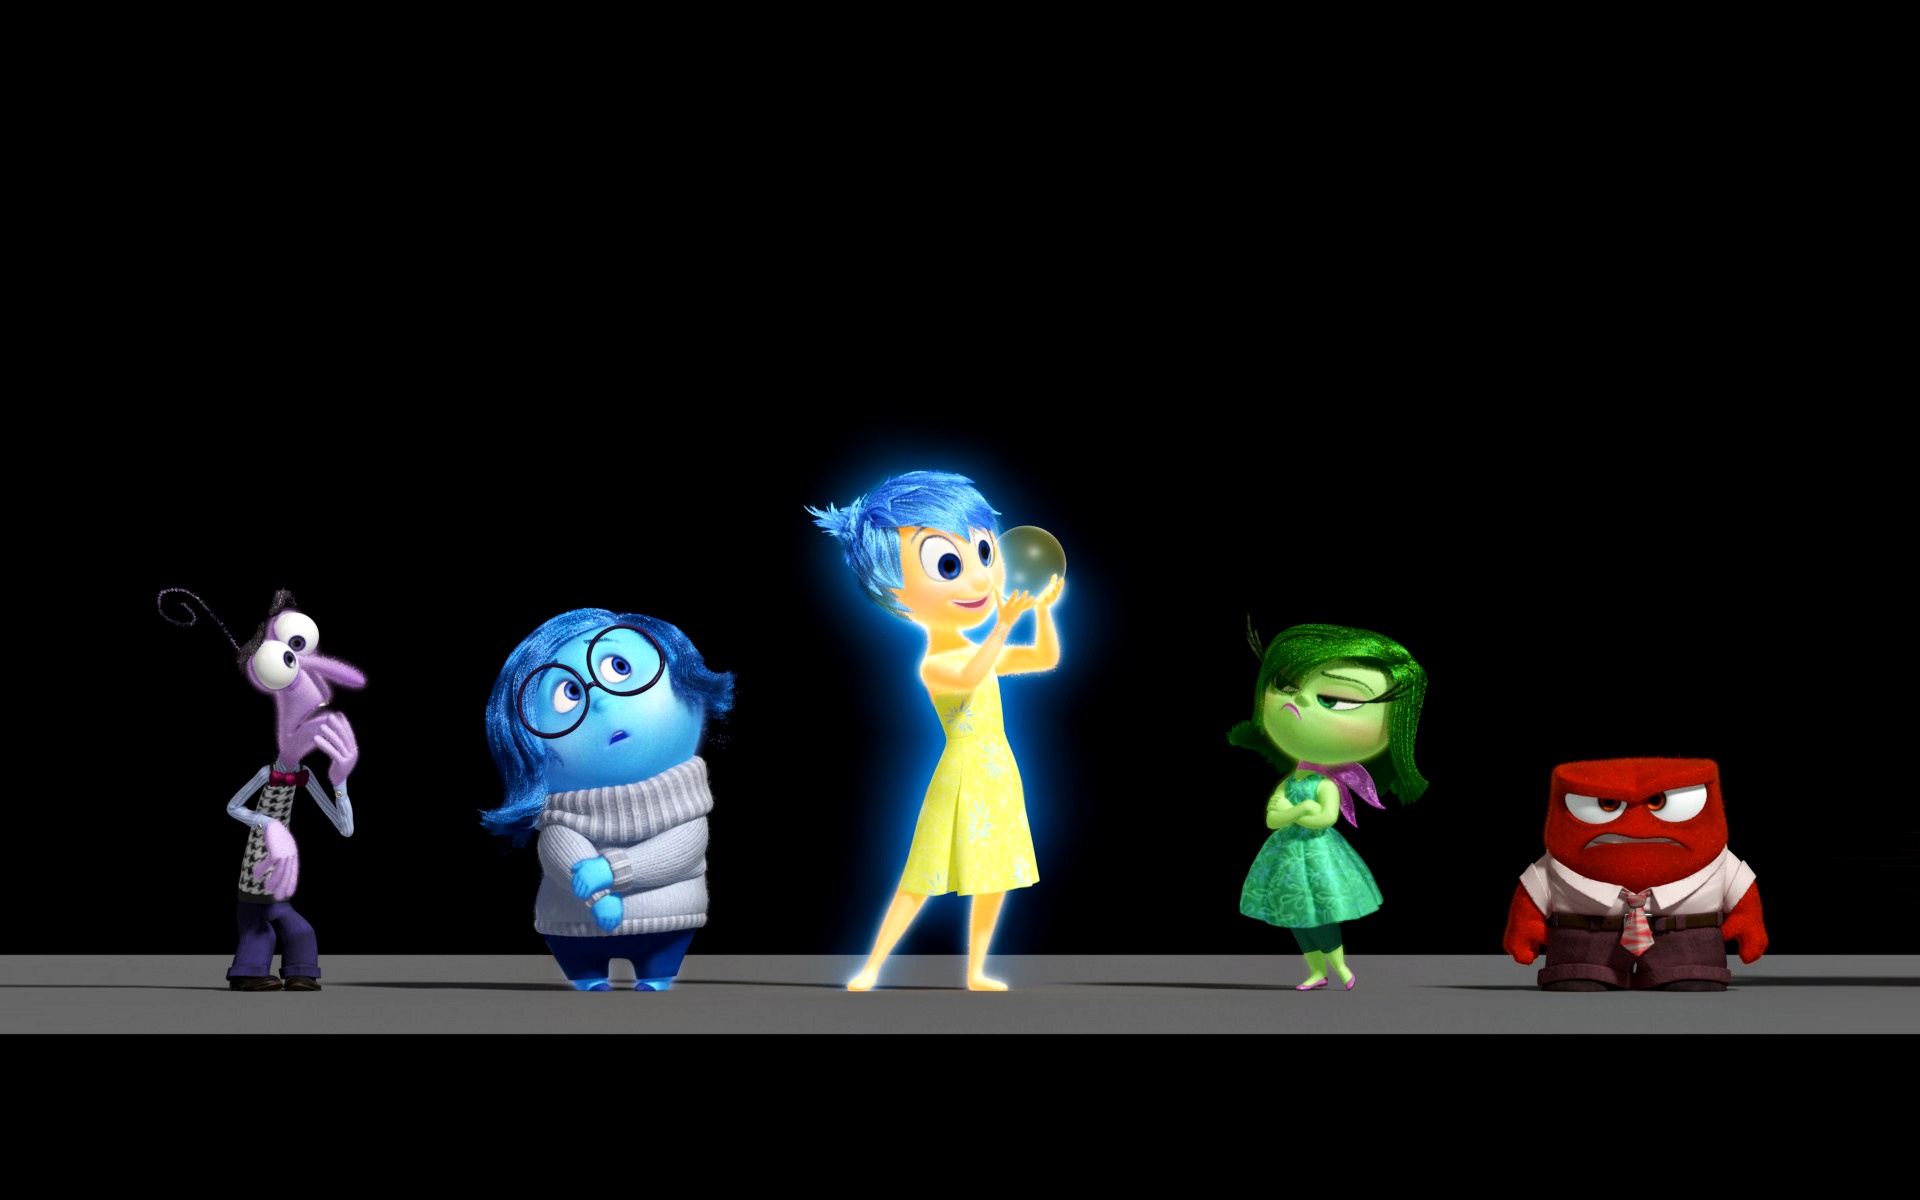  Pixar Inside Out HD Wallpaper Widescreen and Full HD Wallpapers